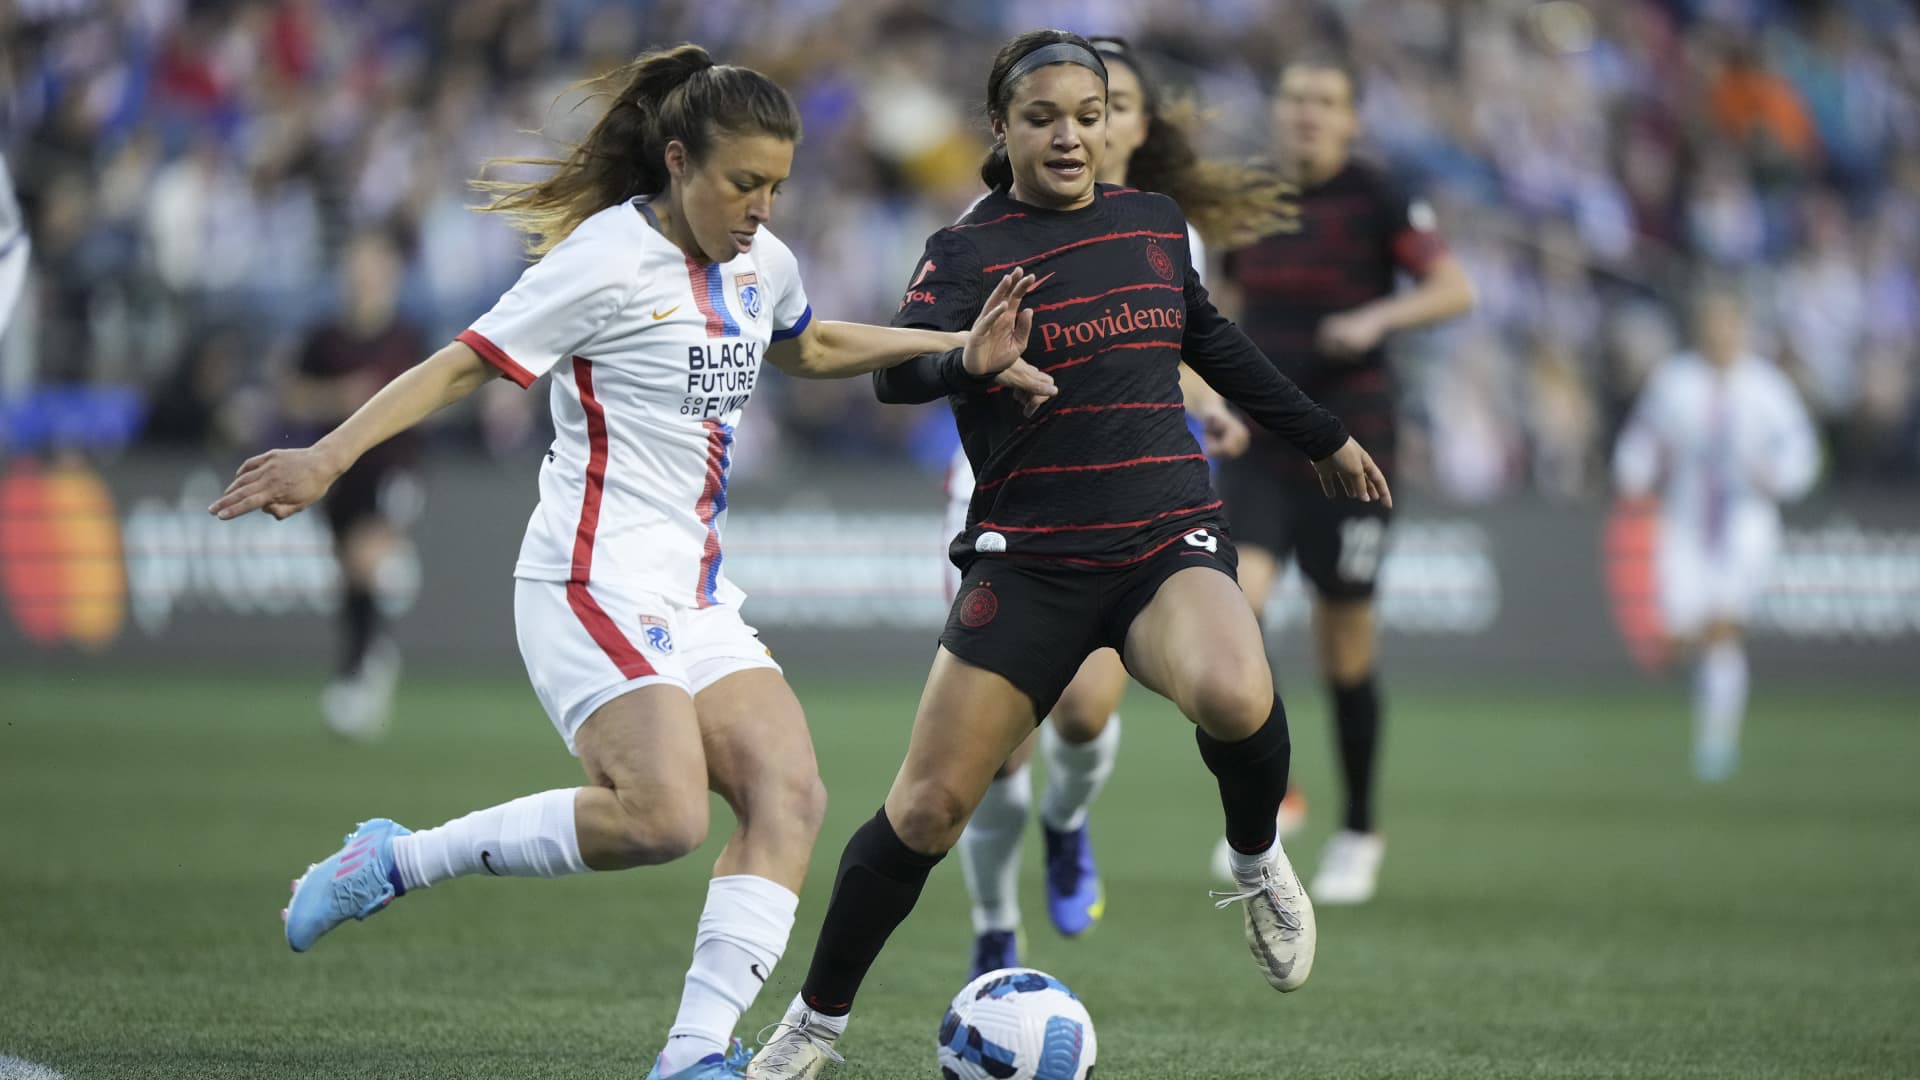 A lot of money is on the line for women’s pro soccer in the U.S.